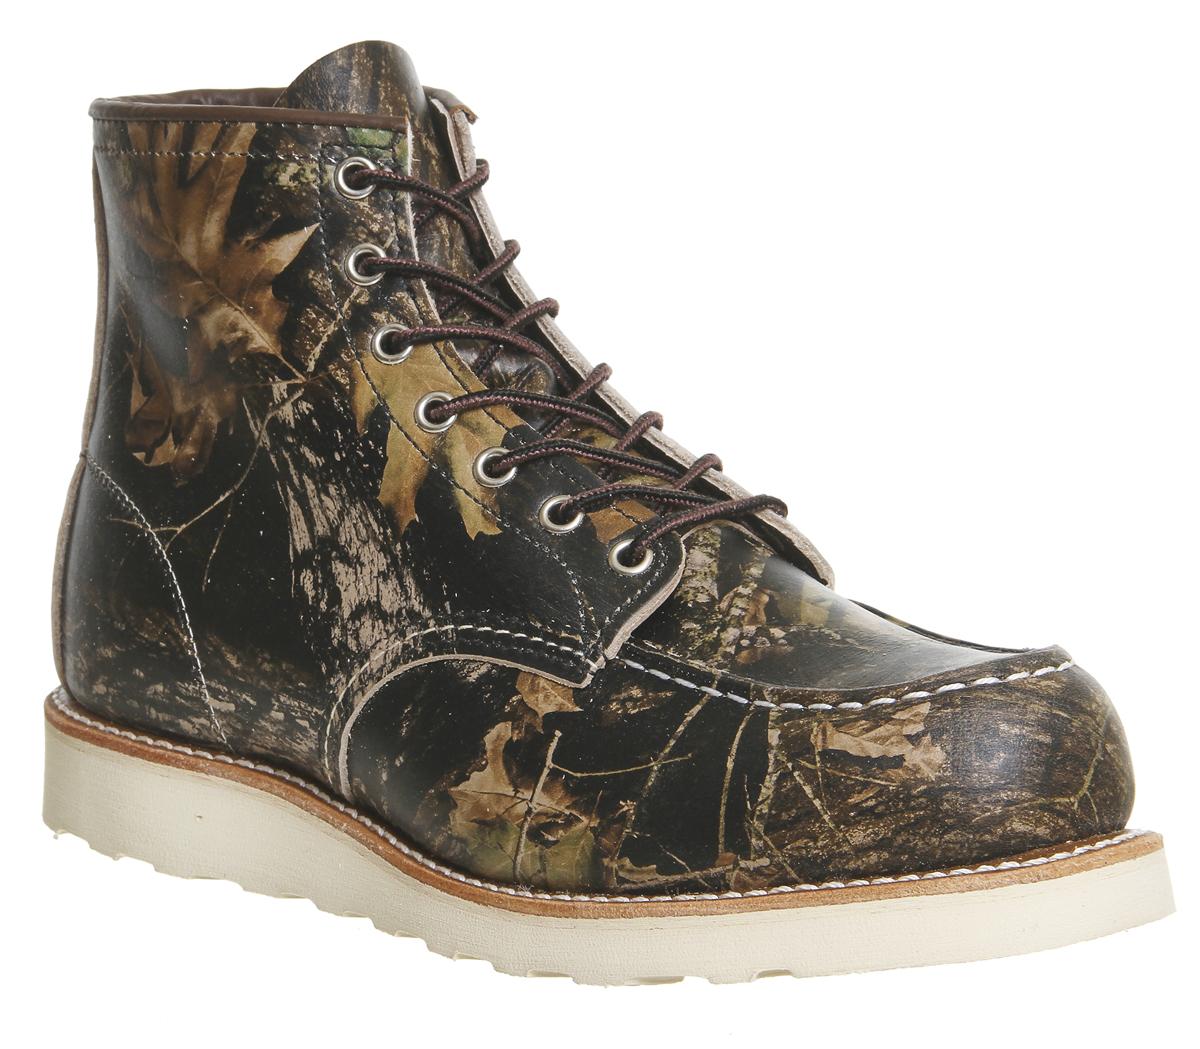 Redwing Work Wedge Boots Camo Leather 